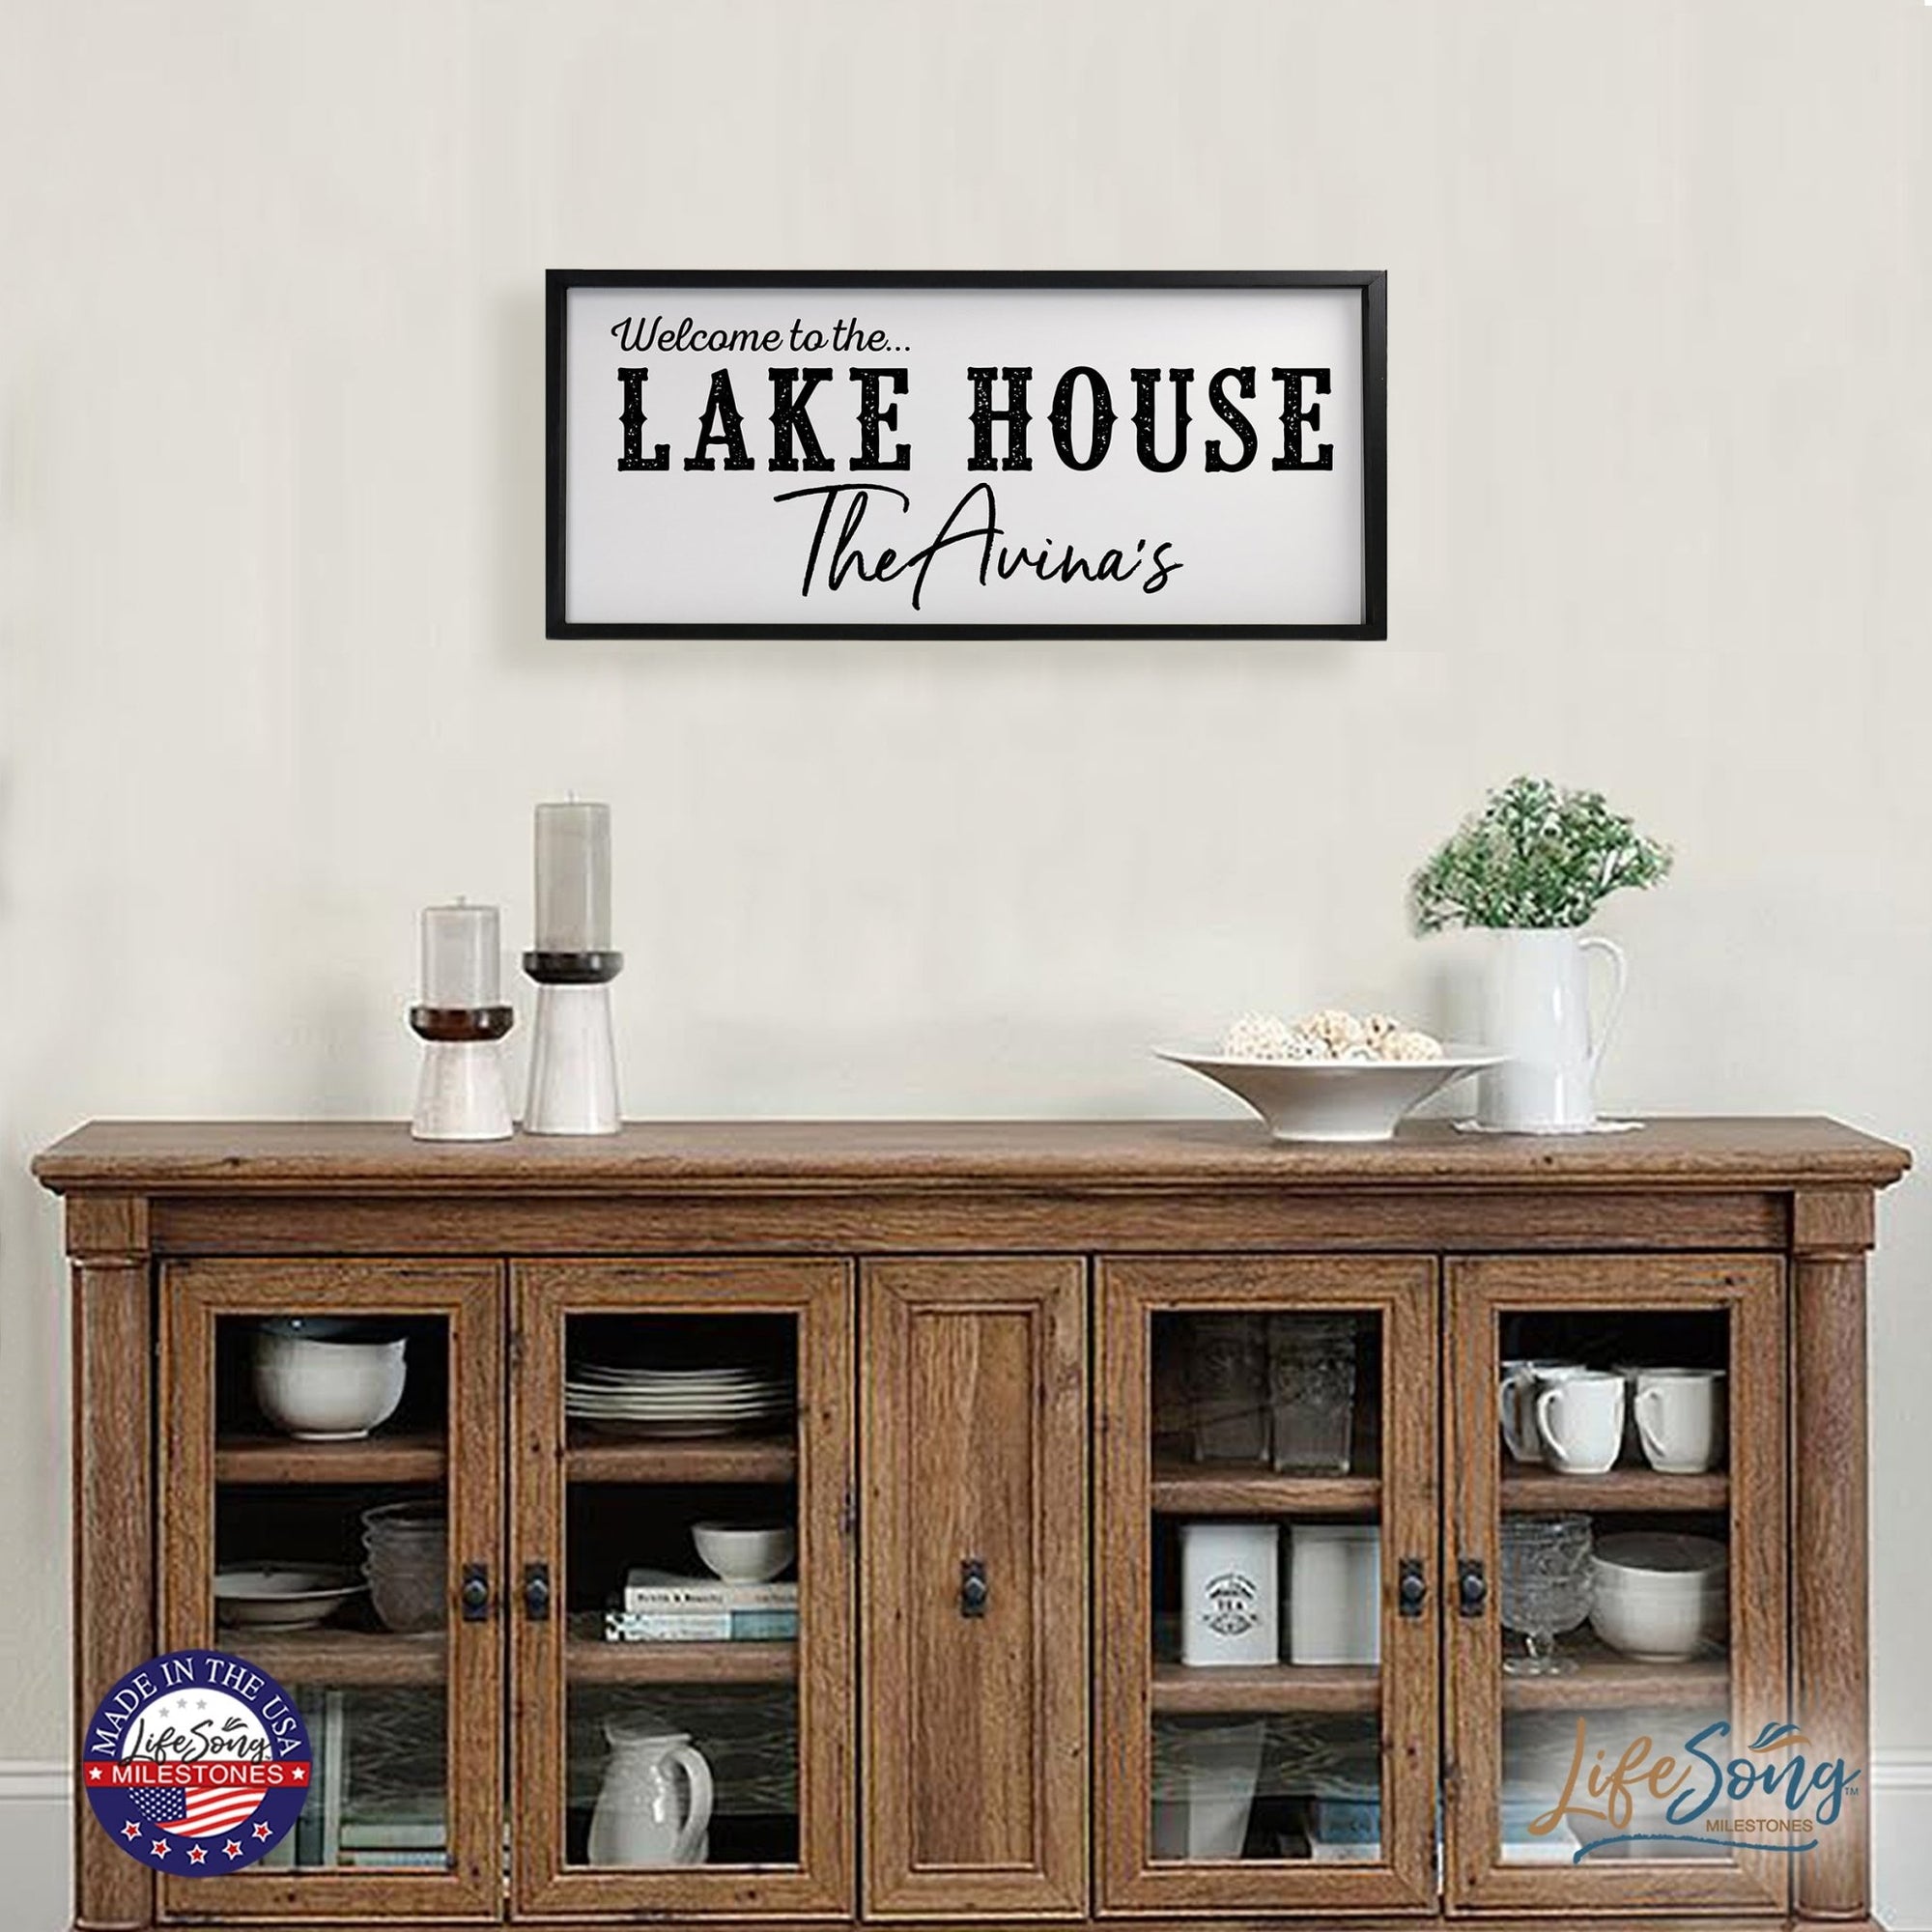 Inspirational Personalized Framed Shadow Box 13x30 - Welcome to the Lake House - LifeSong Milestones